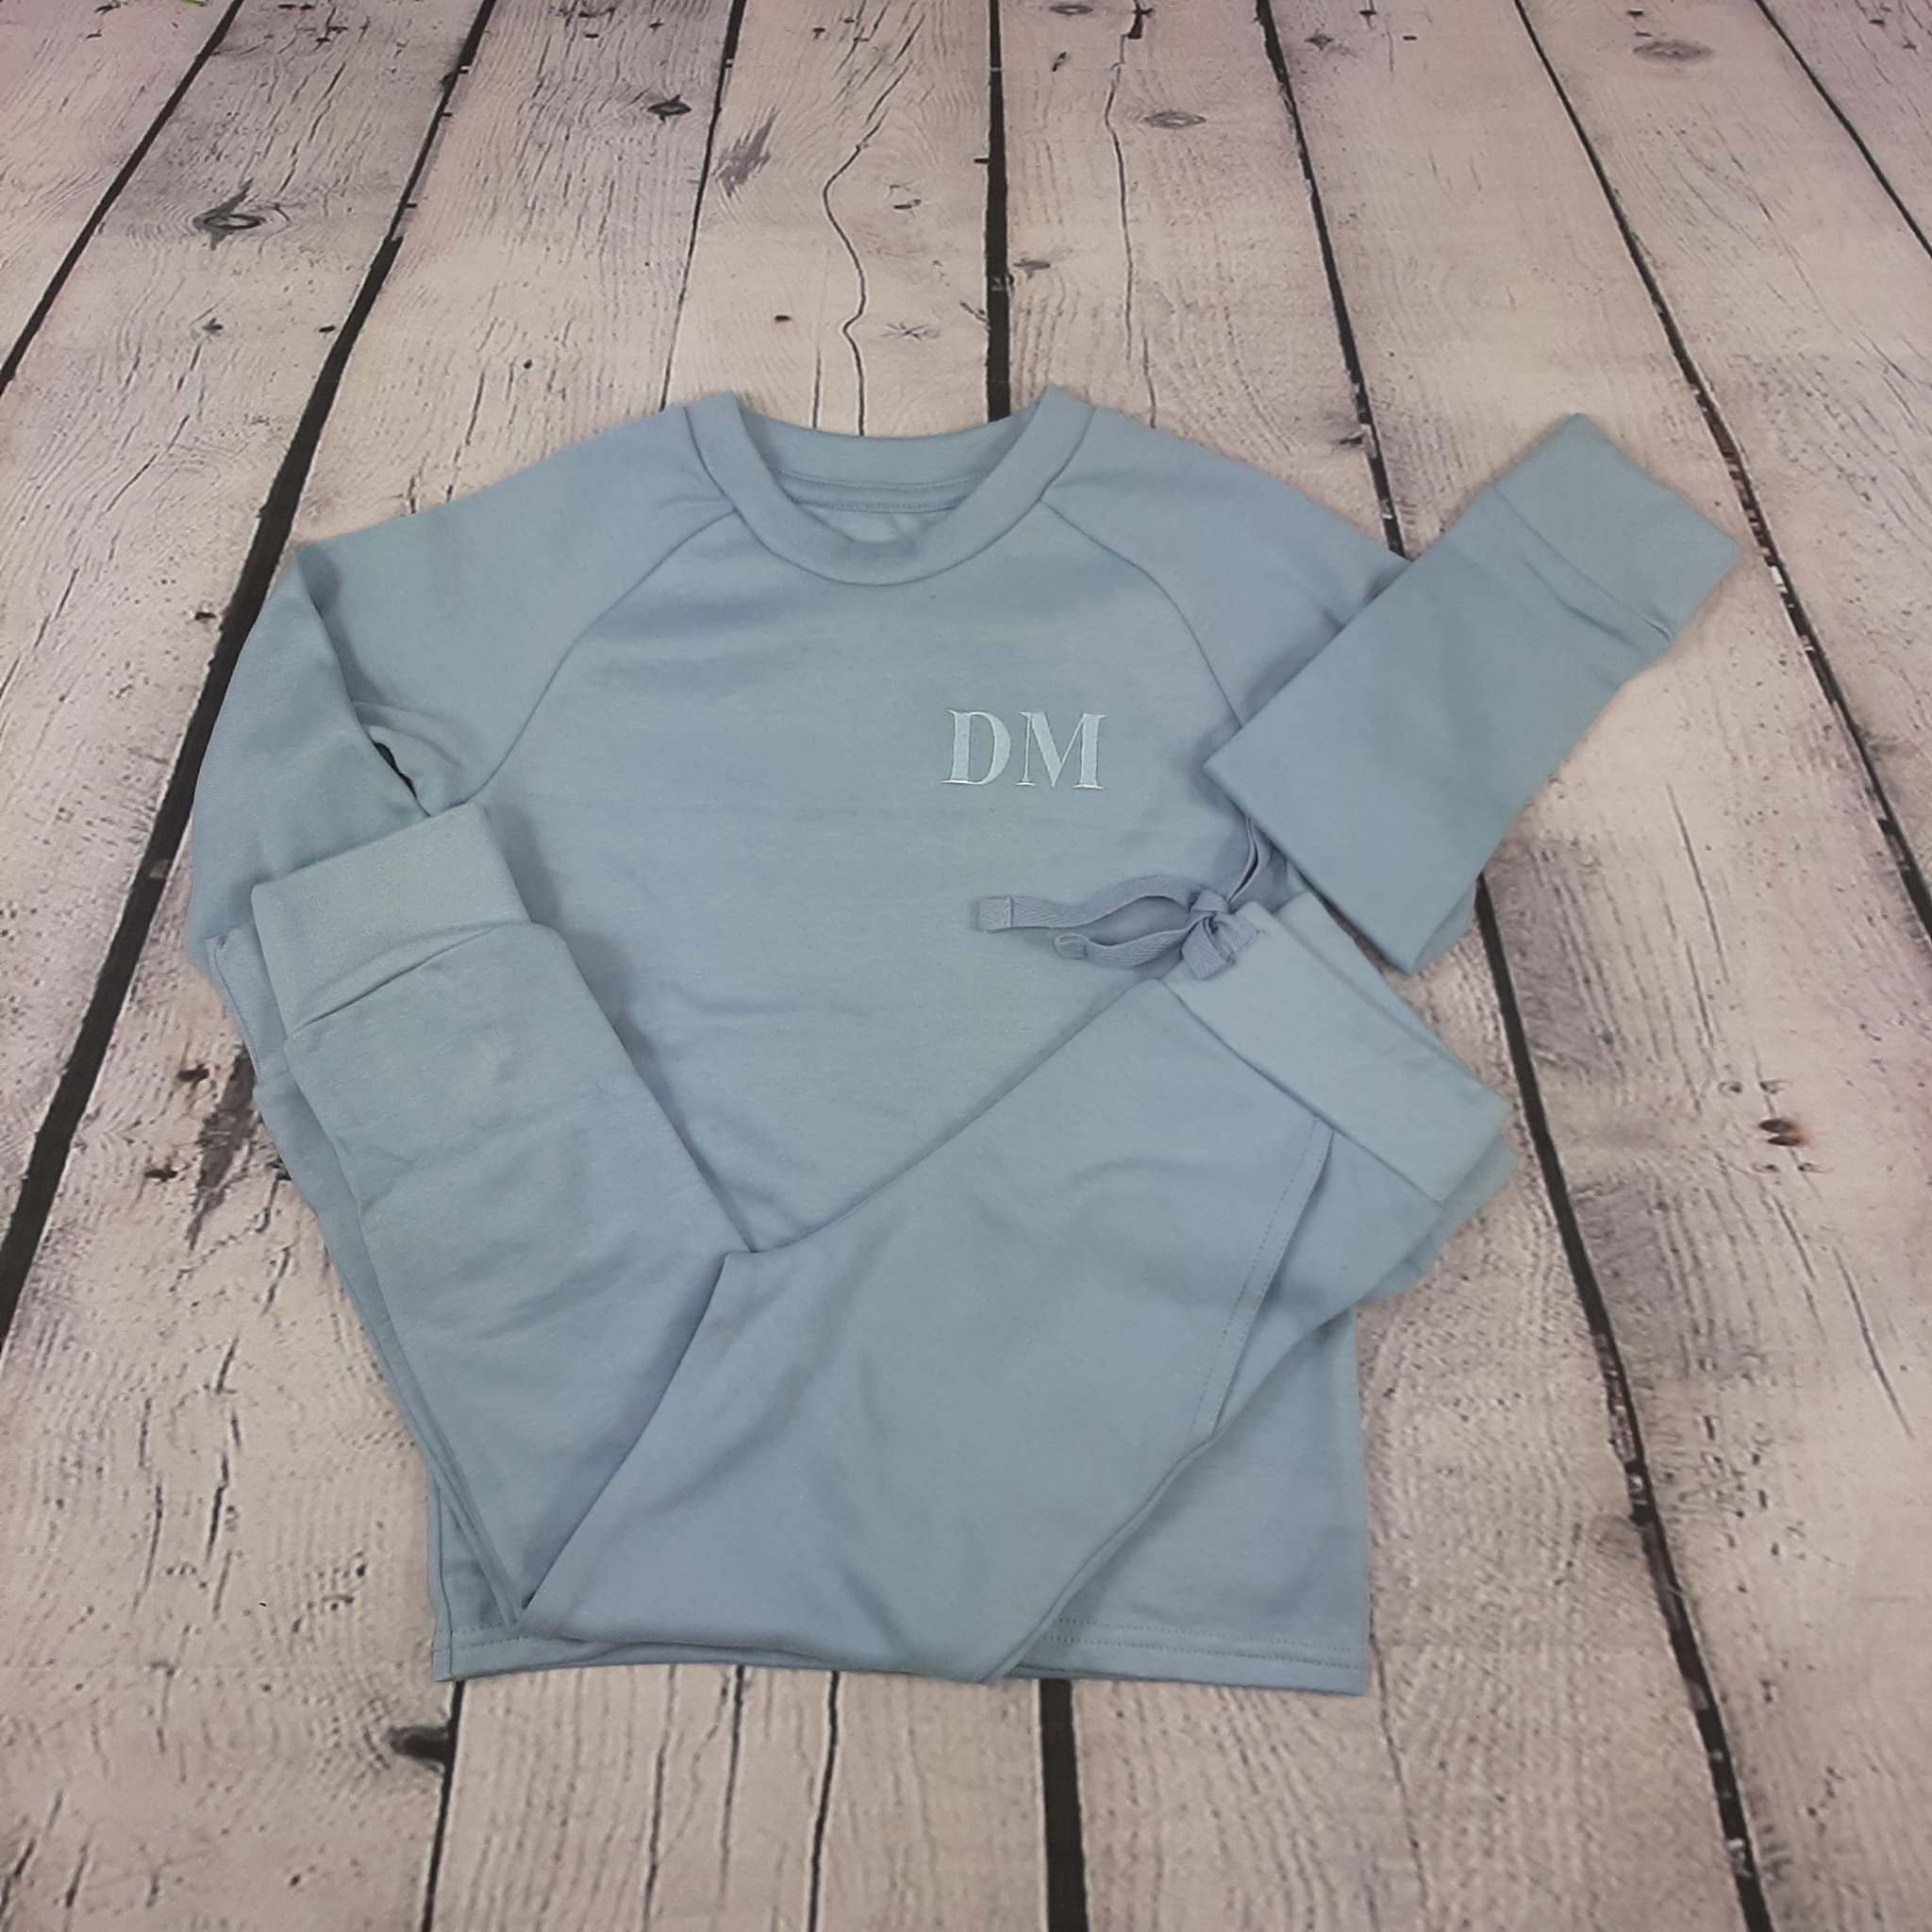 childrens dusky blue loungewear set top and long bottoms with pockets embroidered initials in matching thread